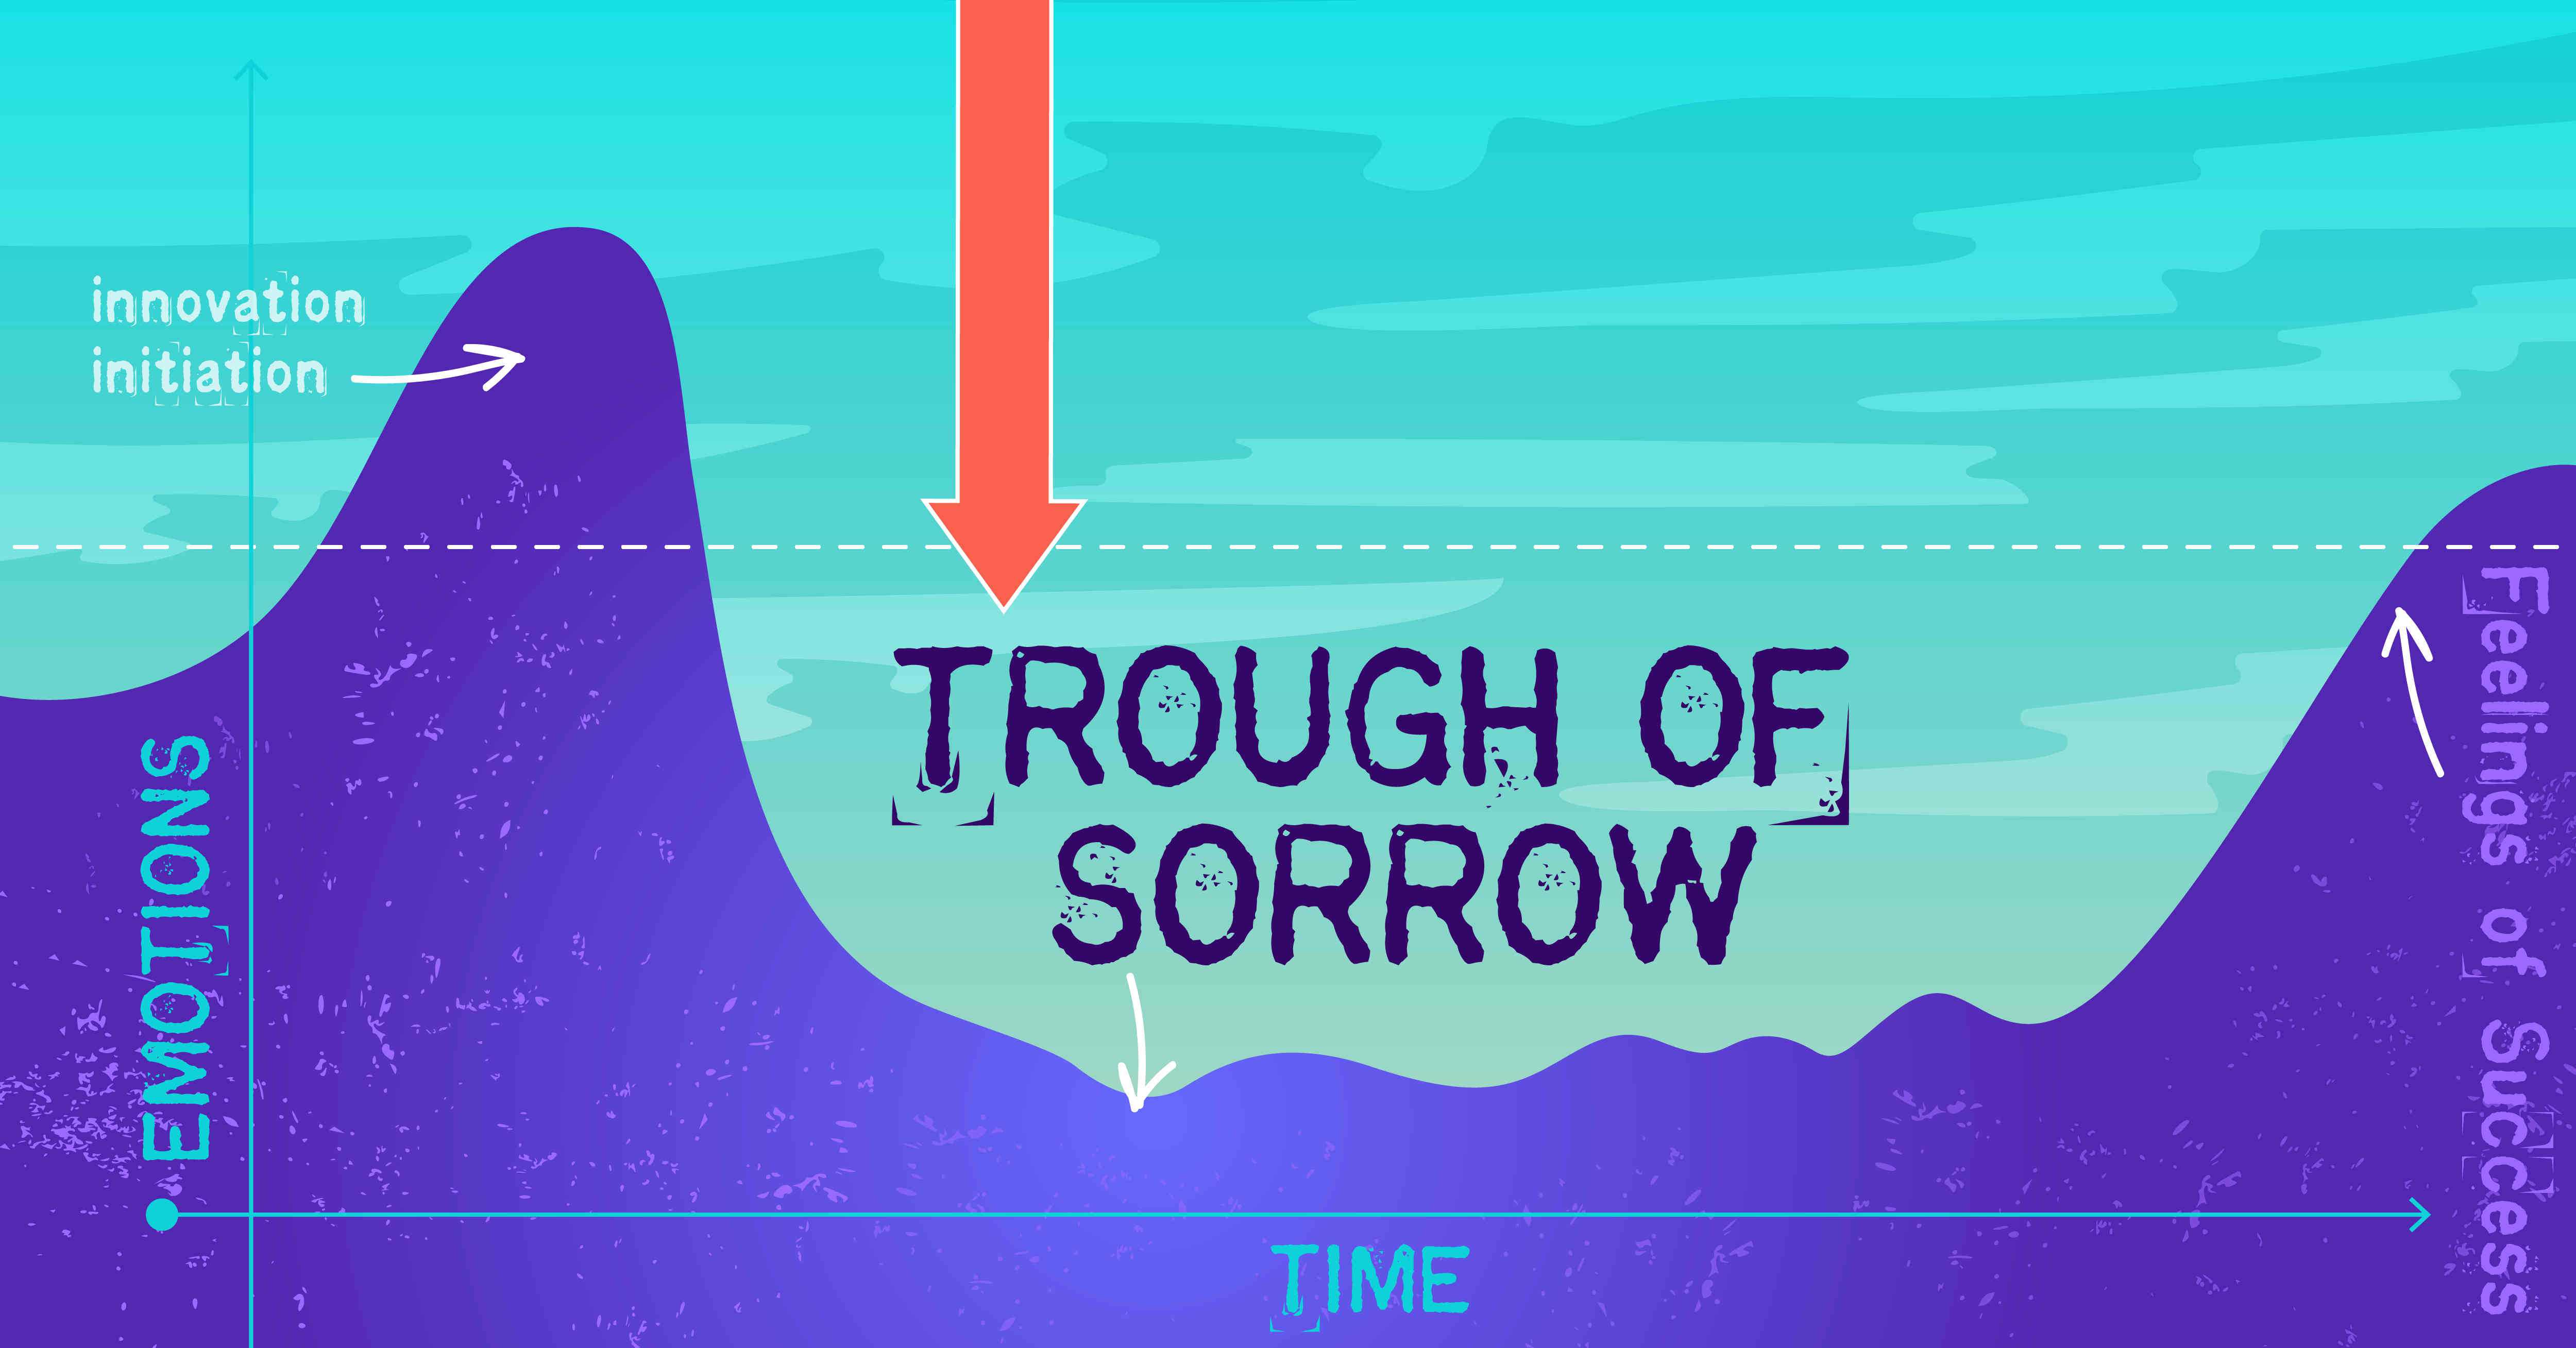 3 Tips to Help Discouraged Healthcare Startups Navigate the "Trough of Sorrow"